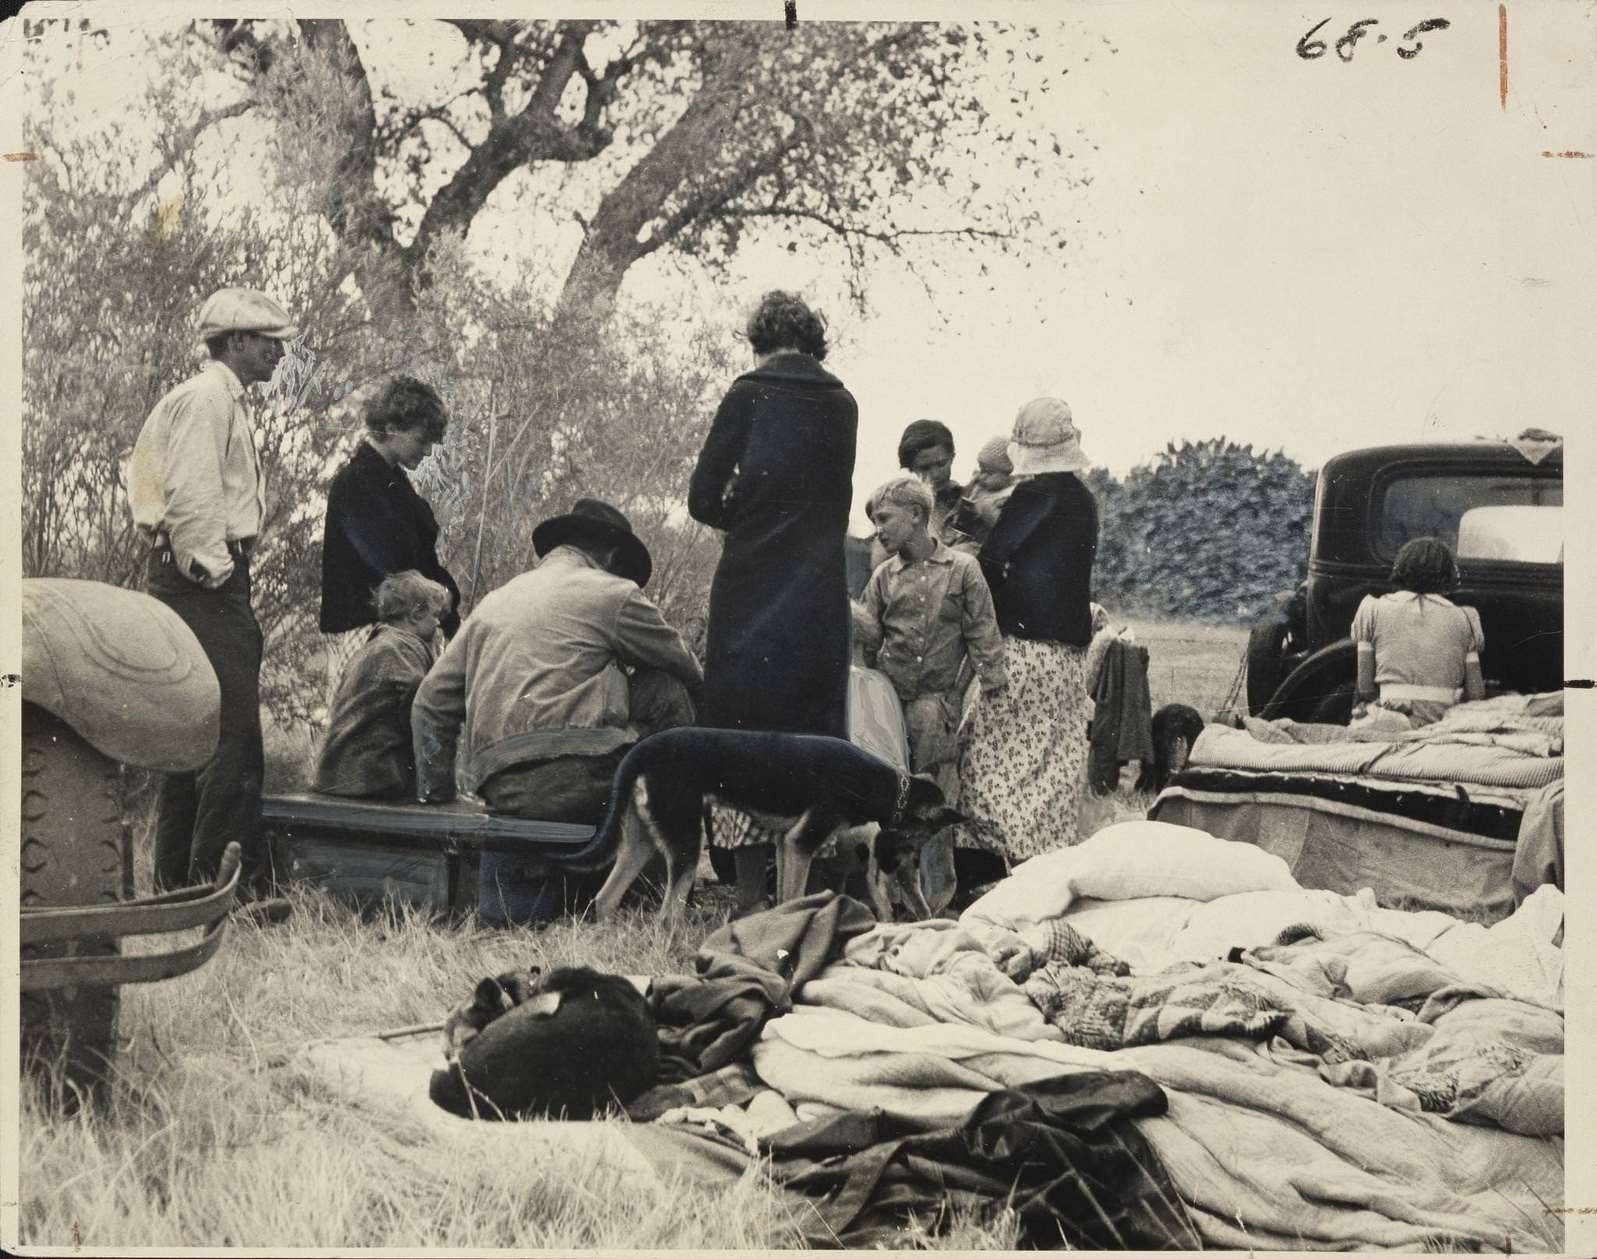 Oklahoma Refugees from the Dust Bowl, Looking for Work on the Cotton Fields, Now Encamped Near Bakersfield, California, 1930s